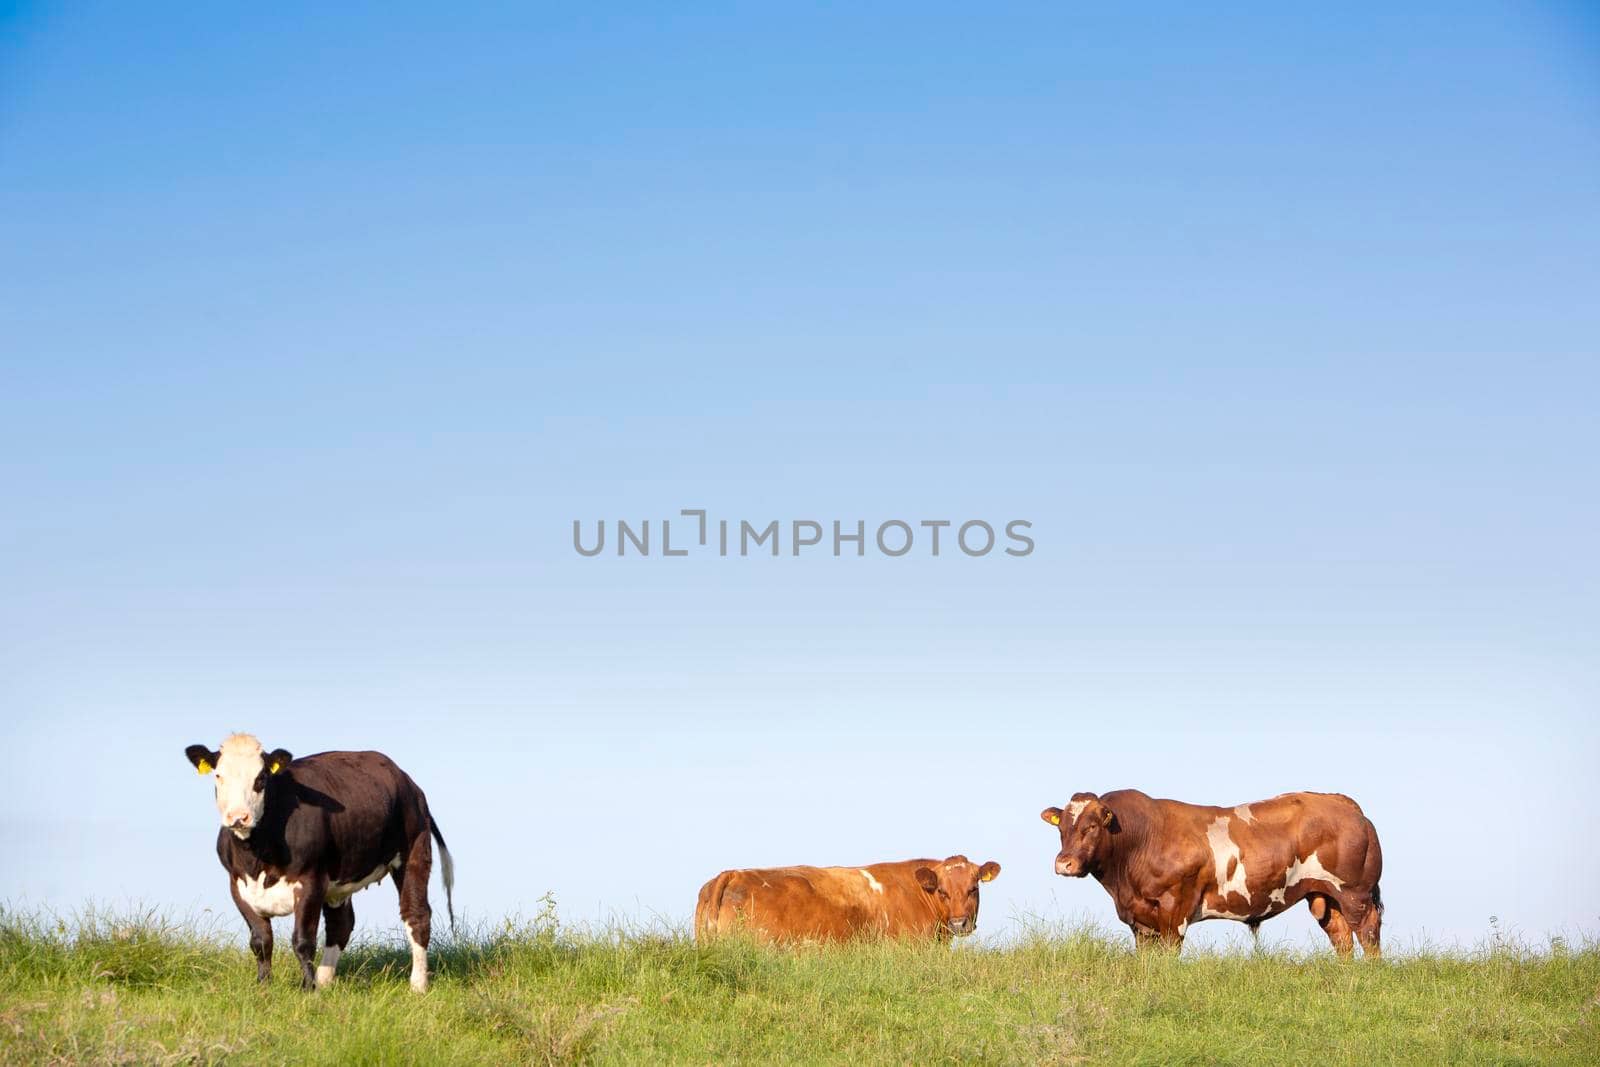 red bull and cows under blue sky in green grass on dike in the netherlands